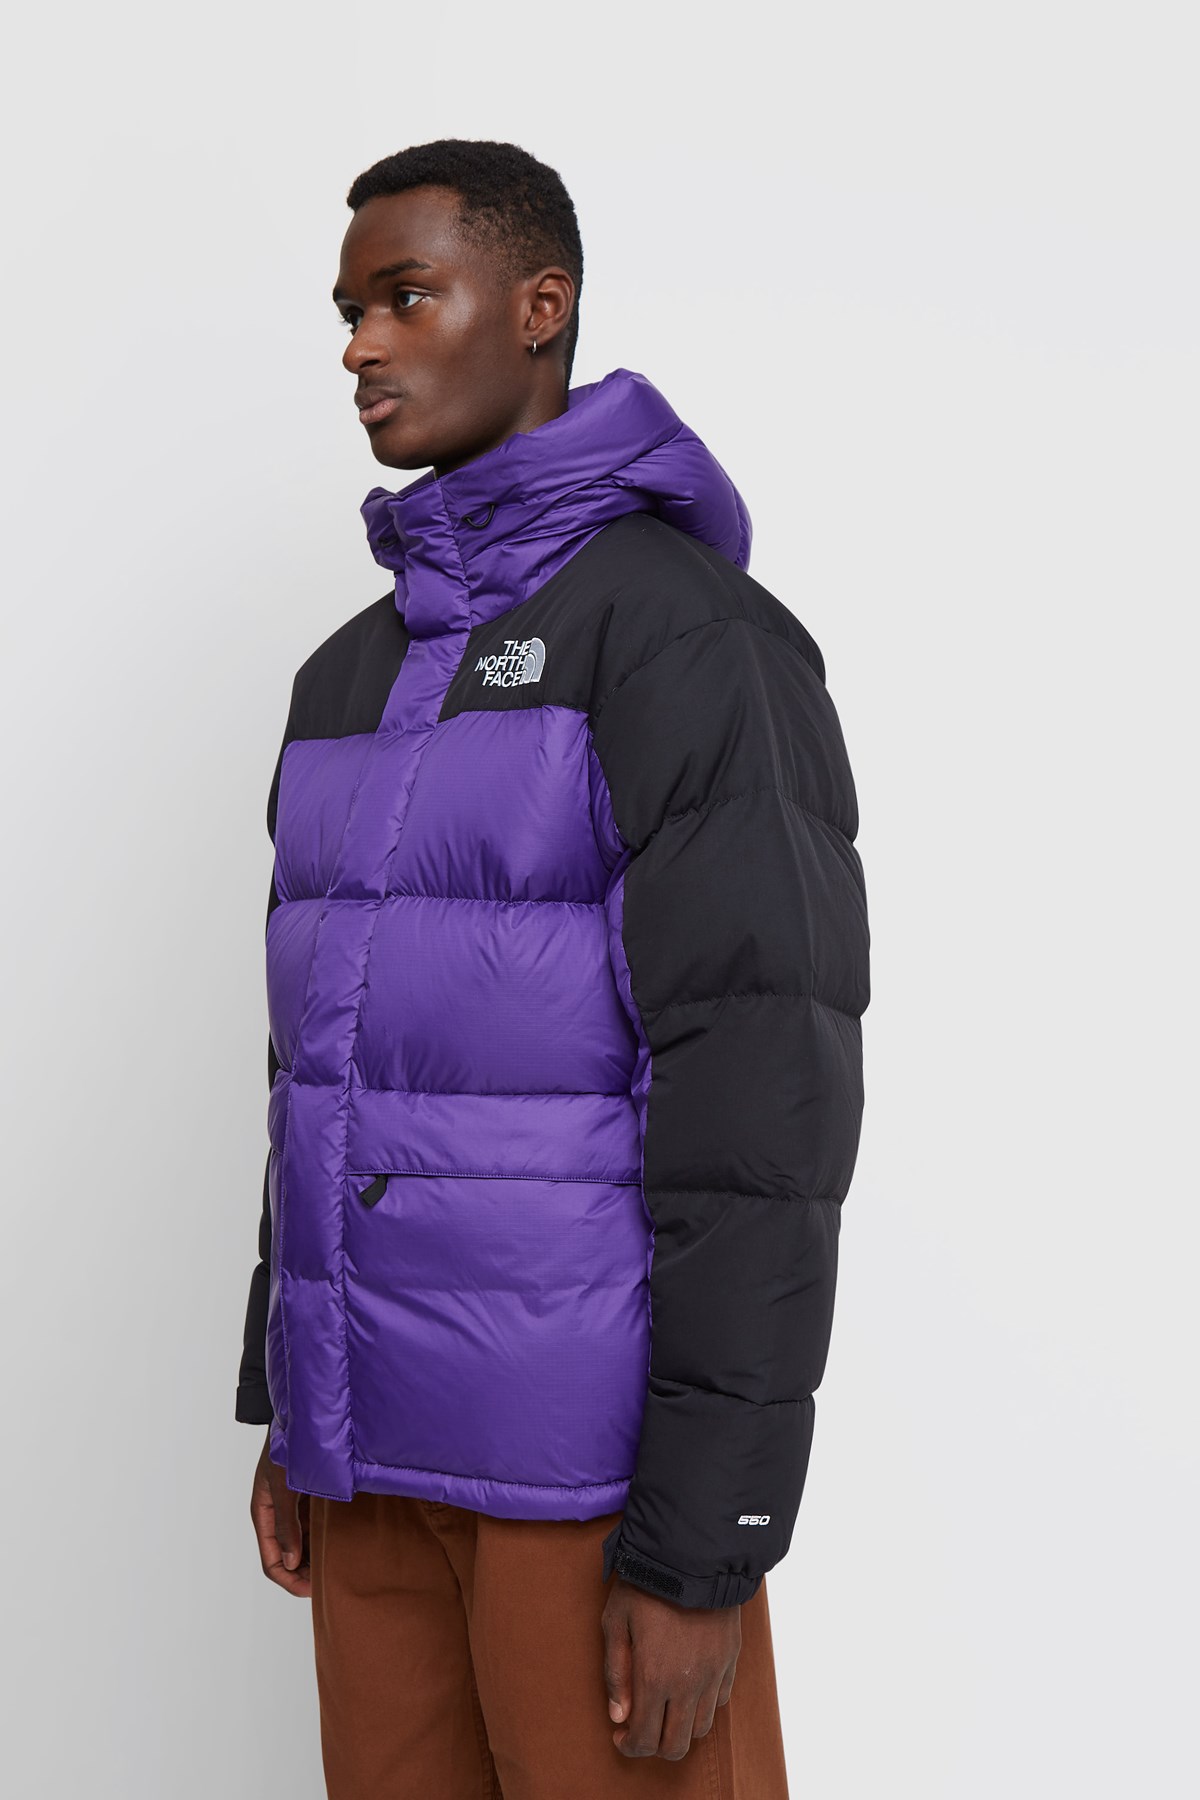 north face 650 down jacket